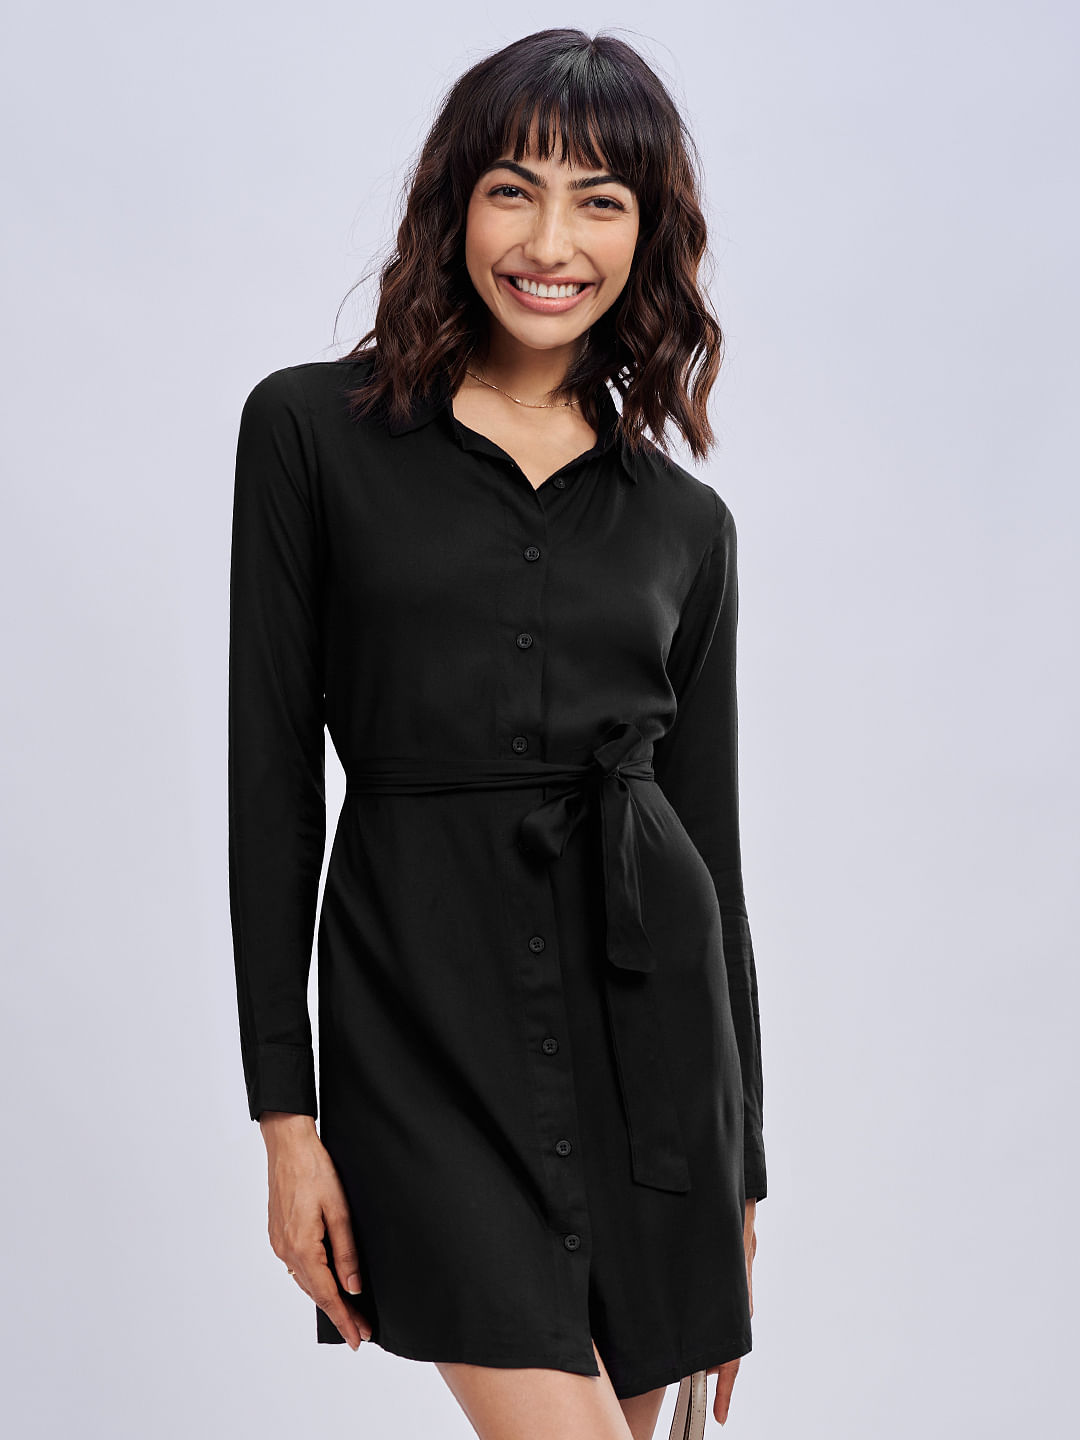 Buy Solid Black Women's Shirt Dress Online at The Souled Store.